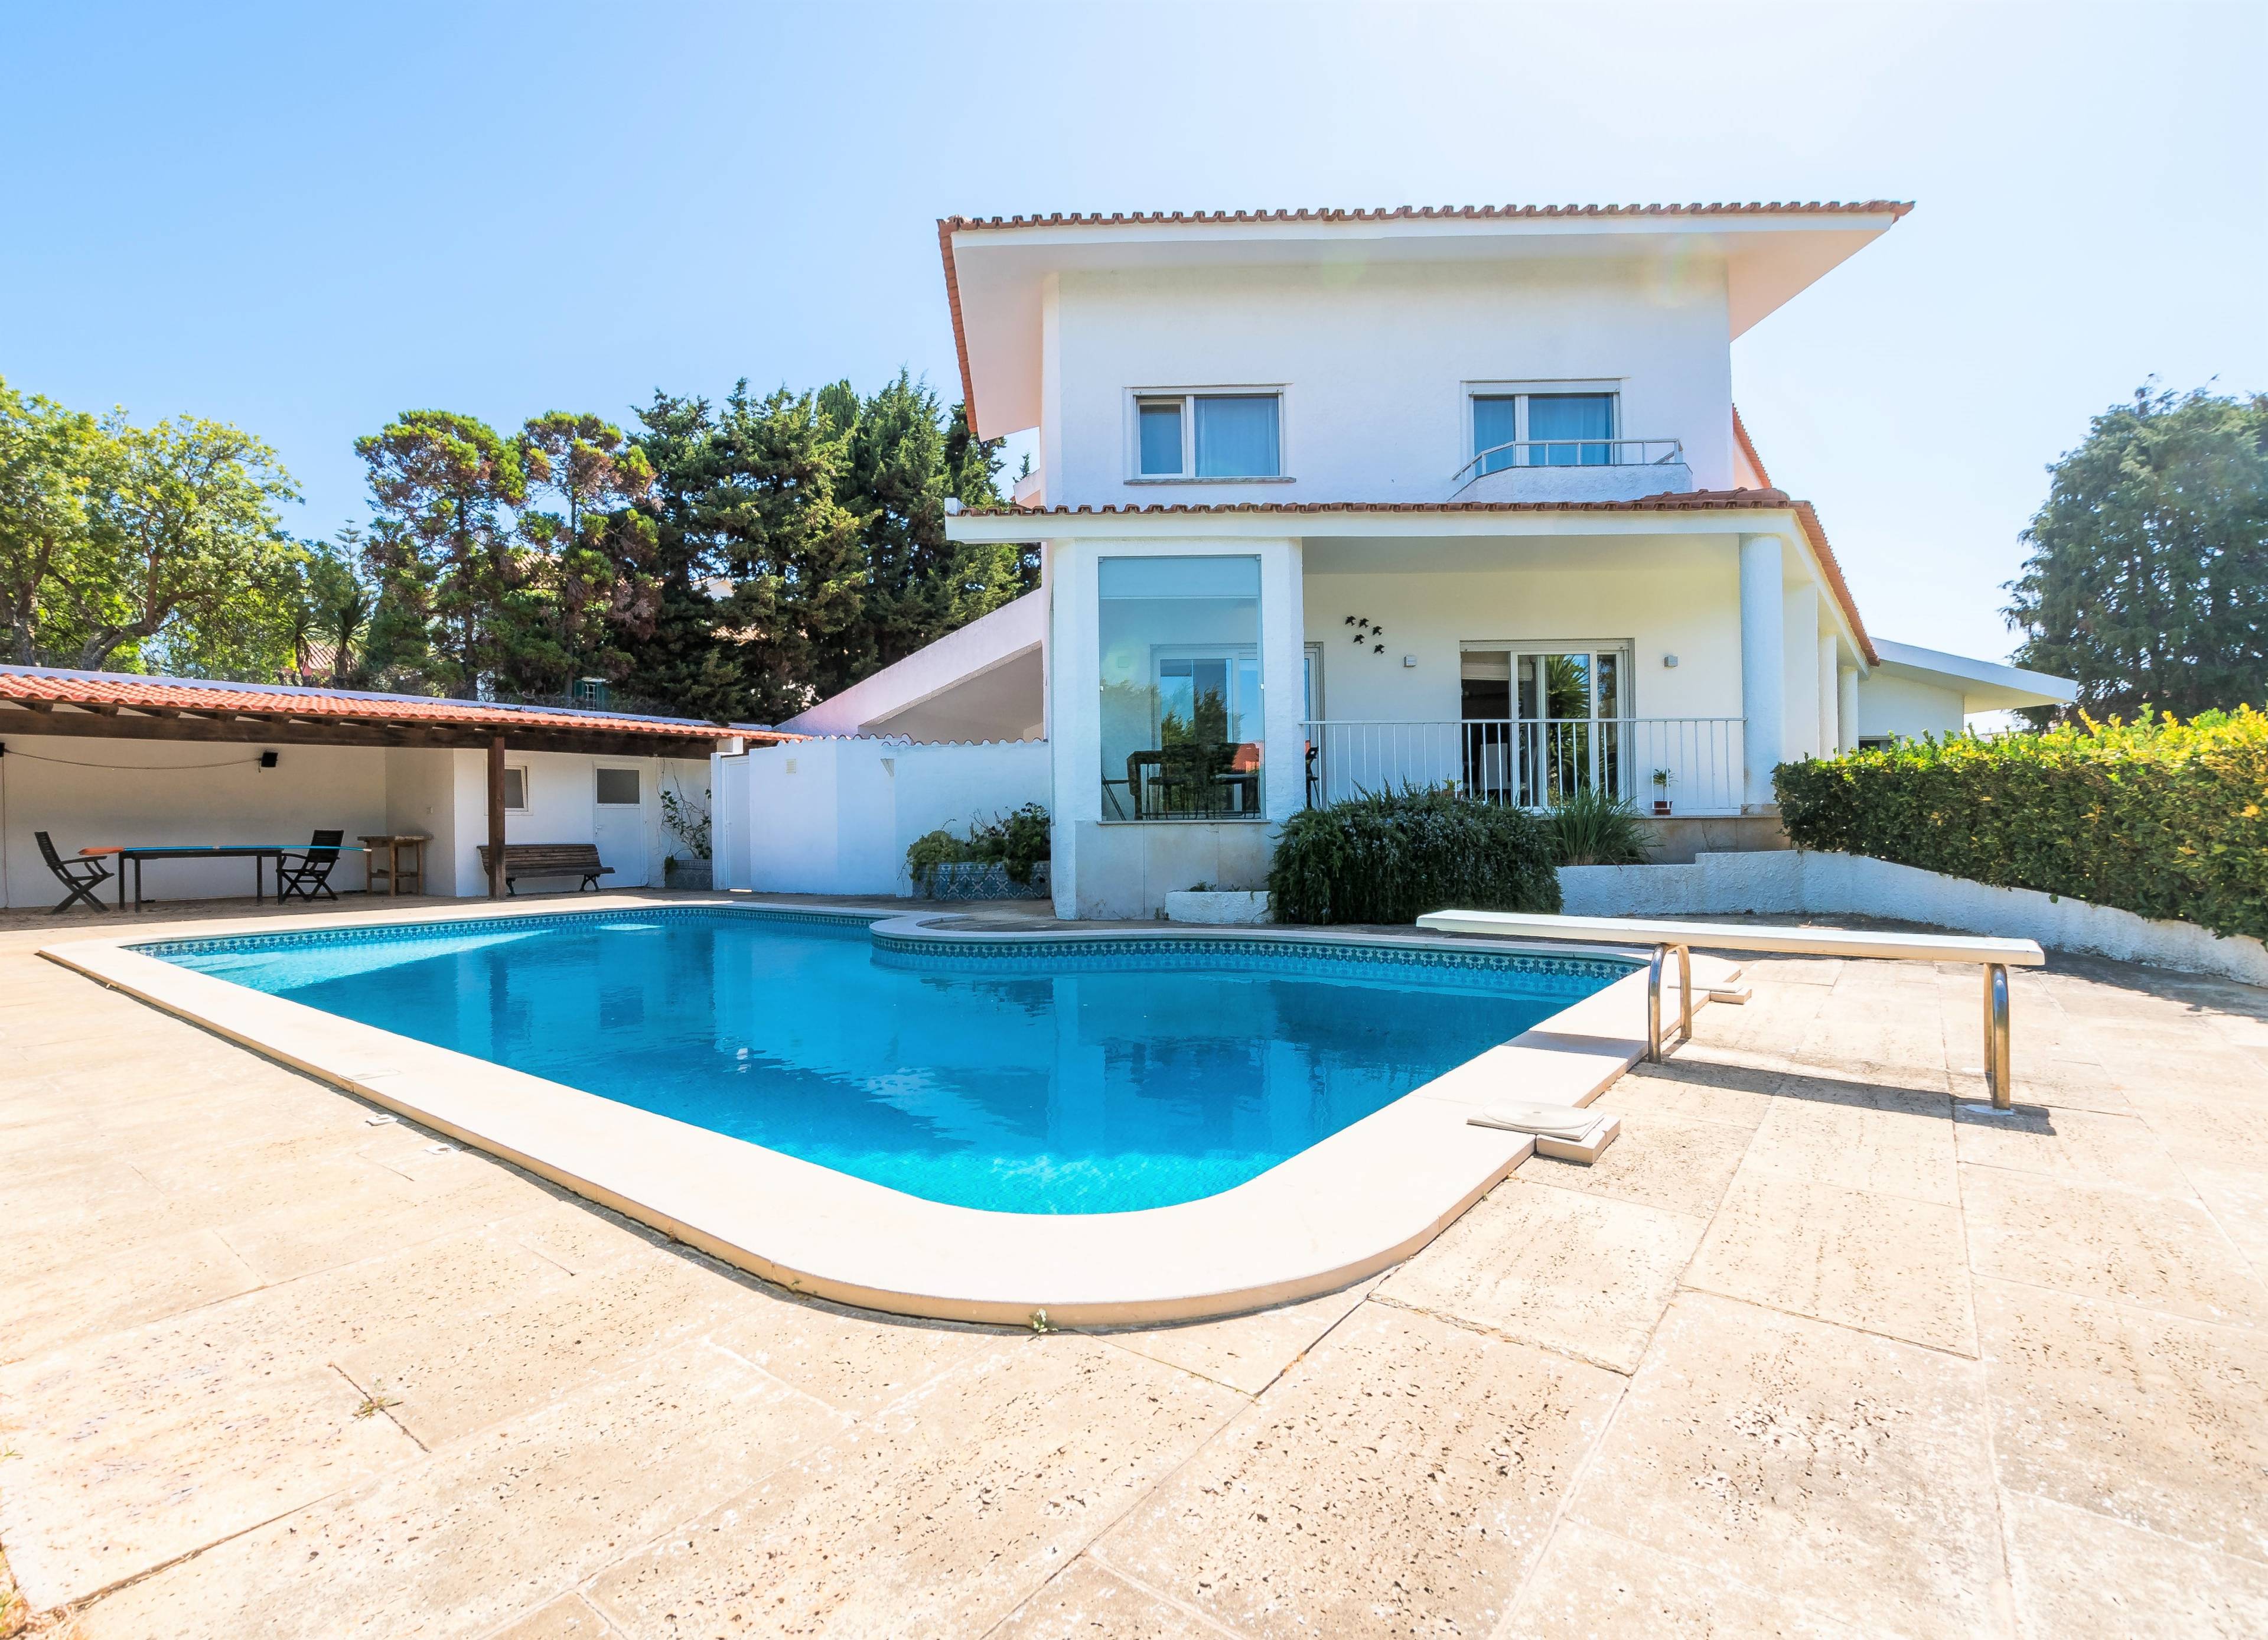 Villa with garden and swimming pool in Cascais, Portugal